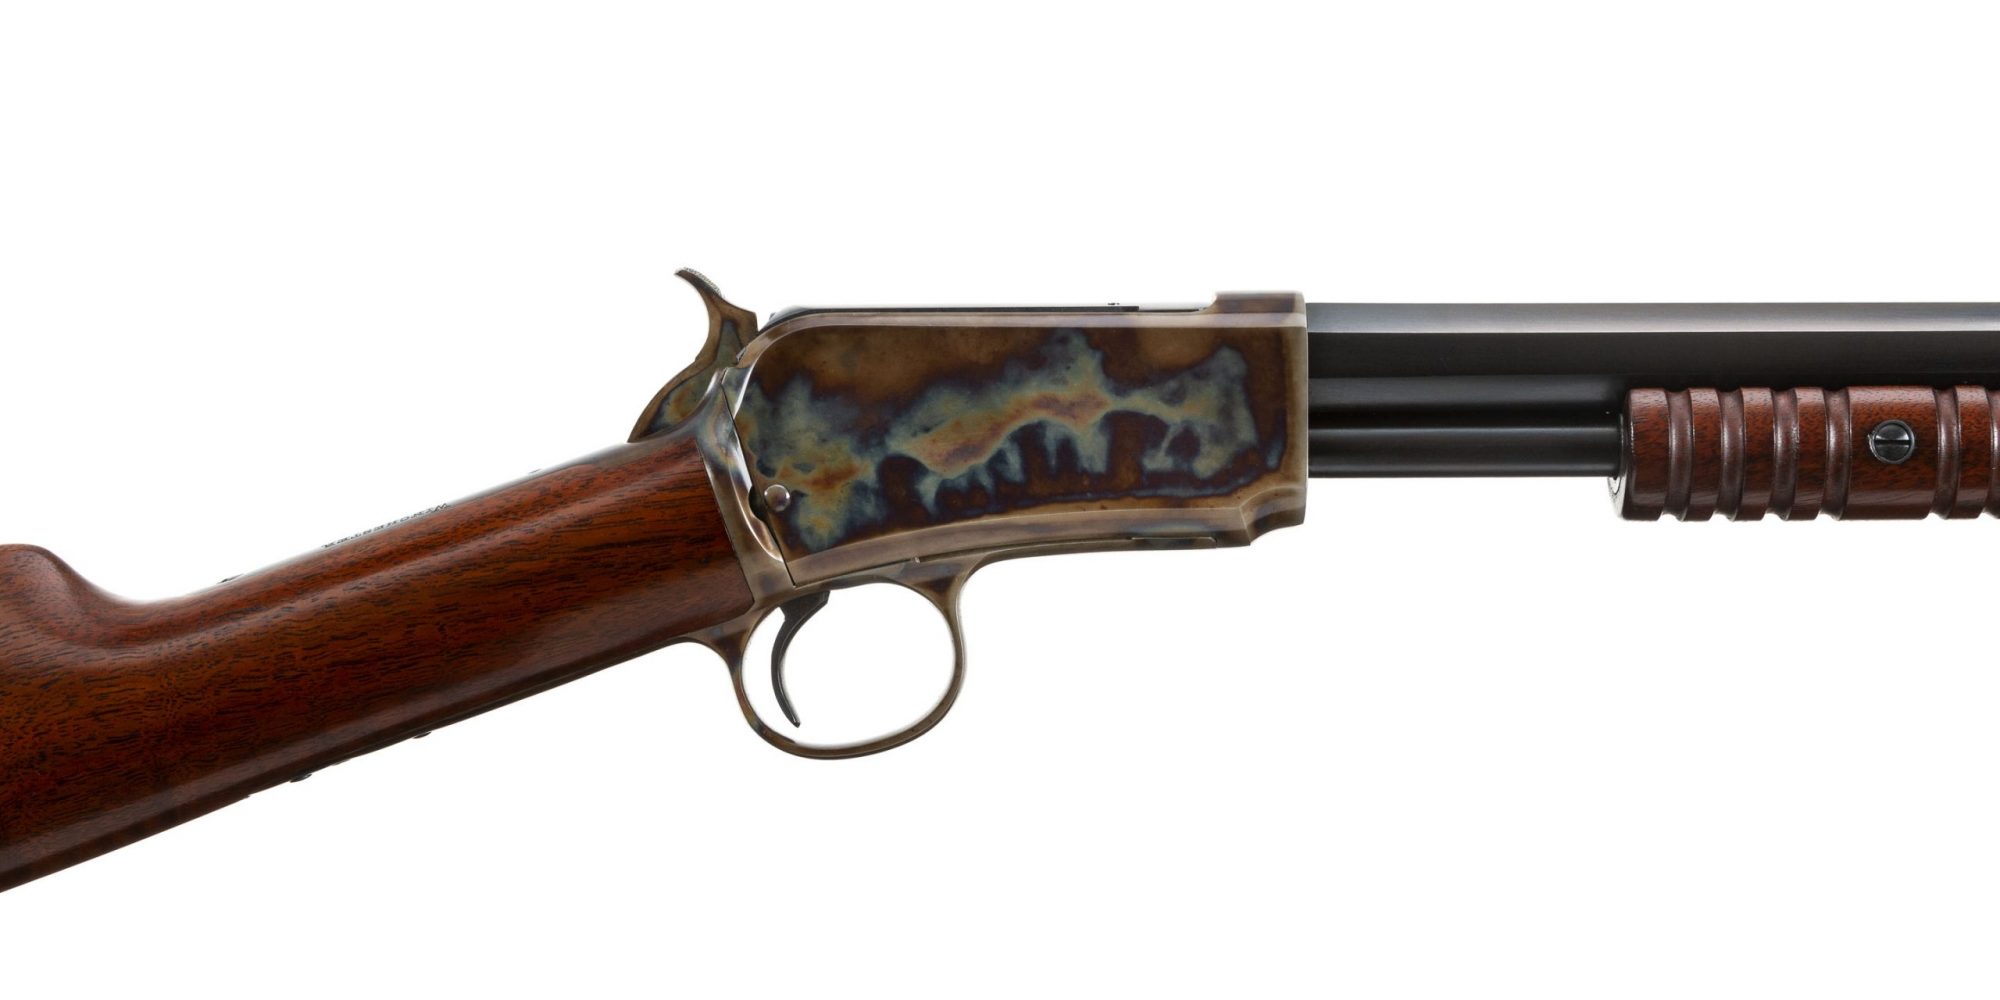 Photo of a Winchester Model 1890 from 1895, restored by Turnbull Restoration in 2007